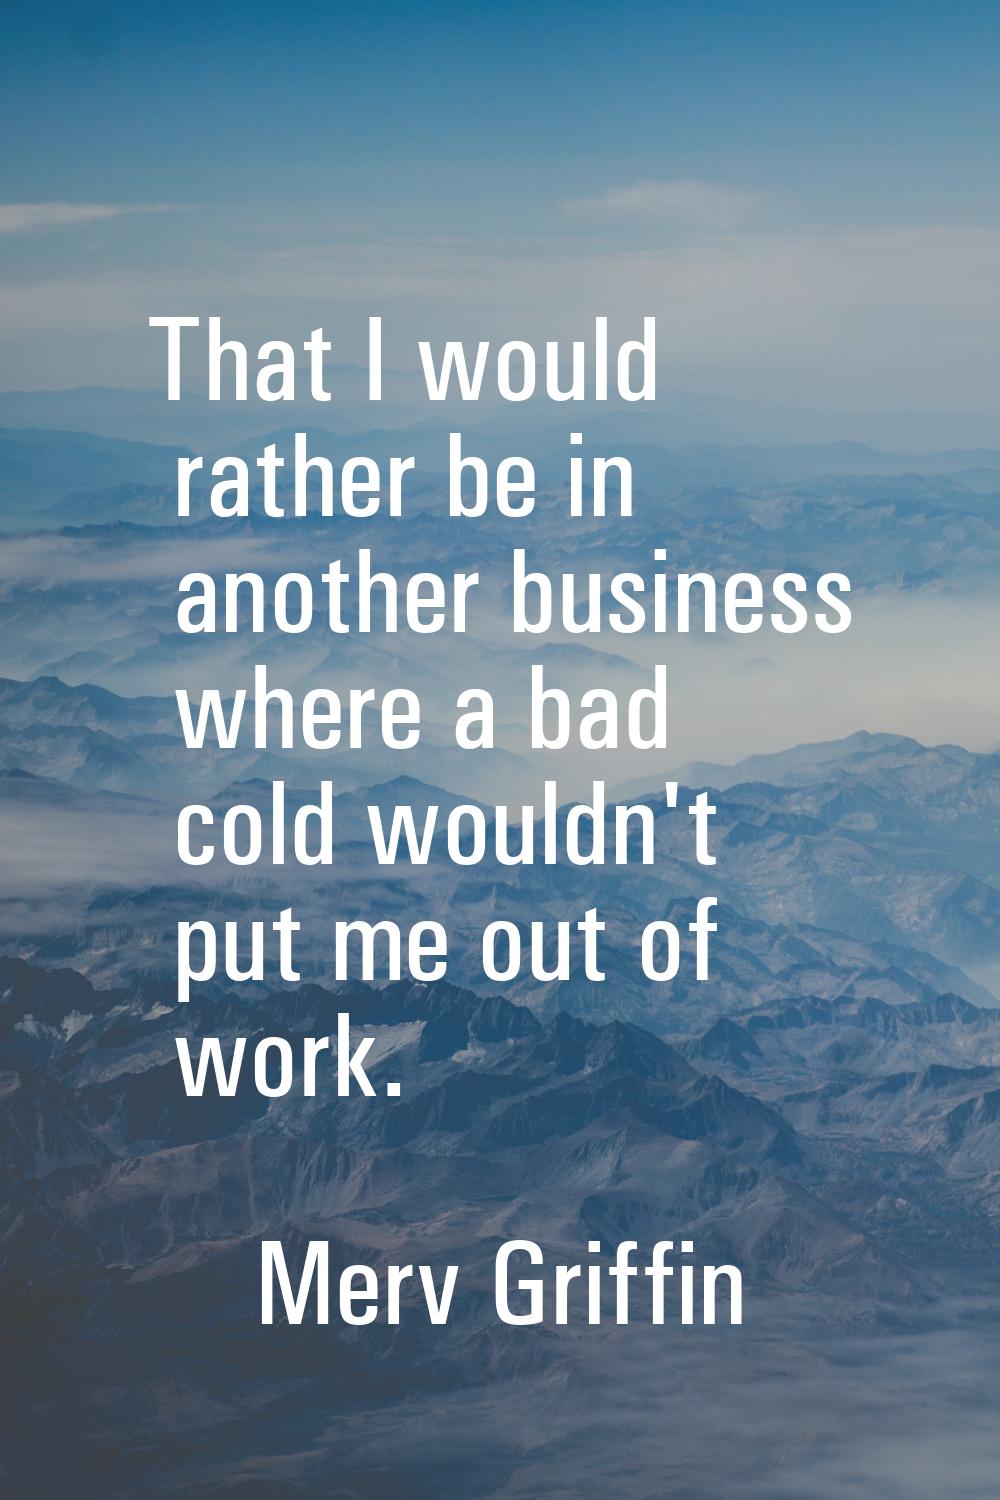 That I would rather be in another business where a bad cold wouldn't put me out of work.